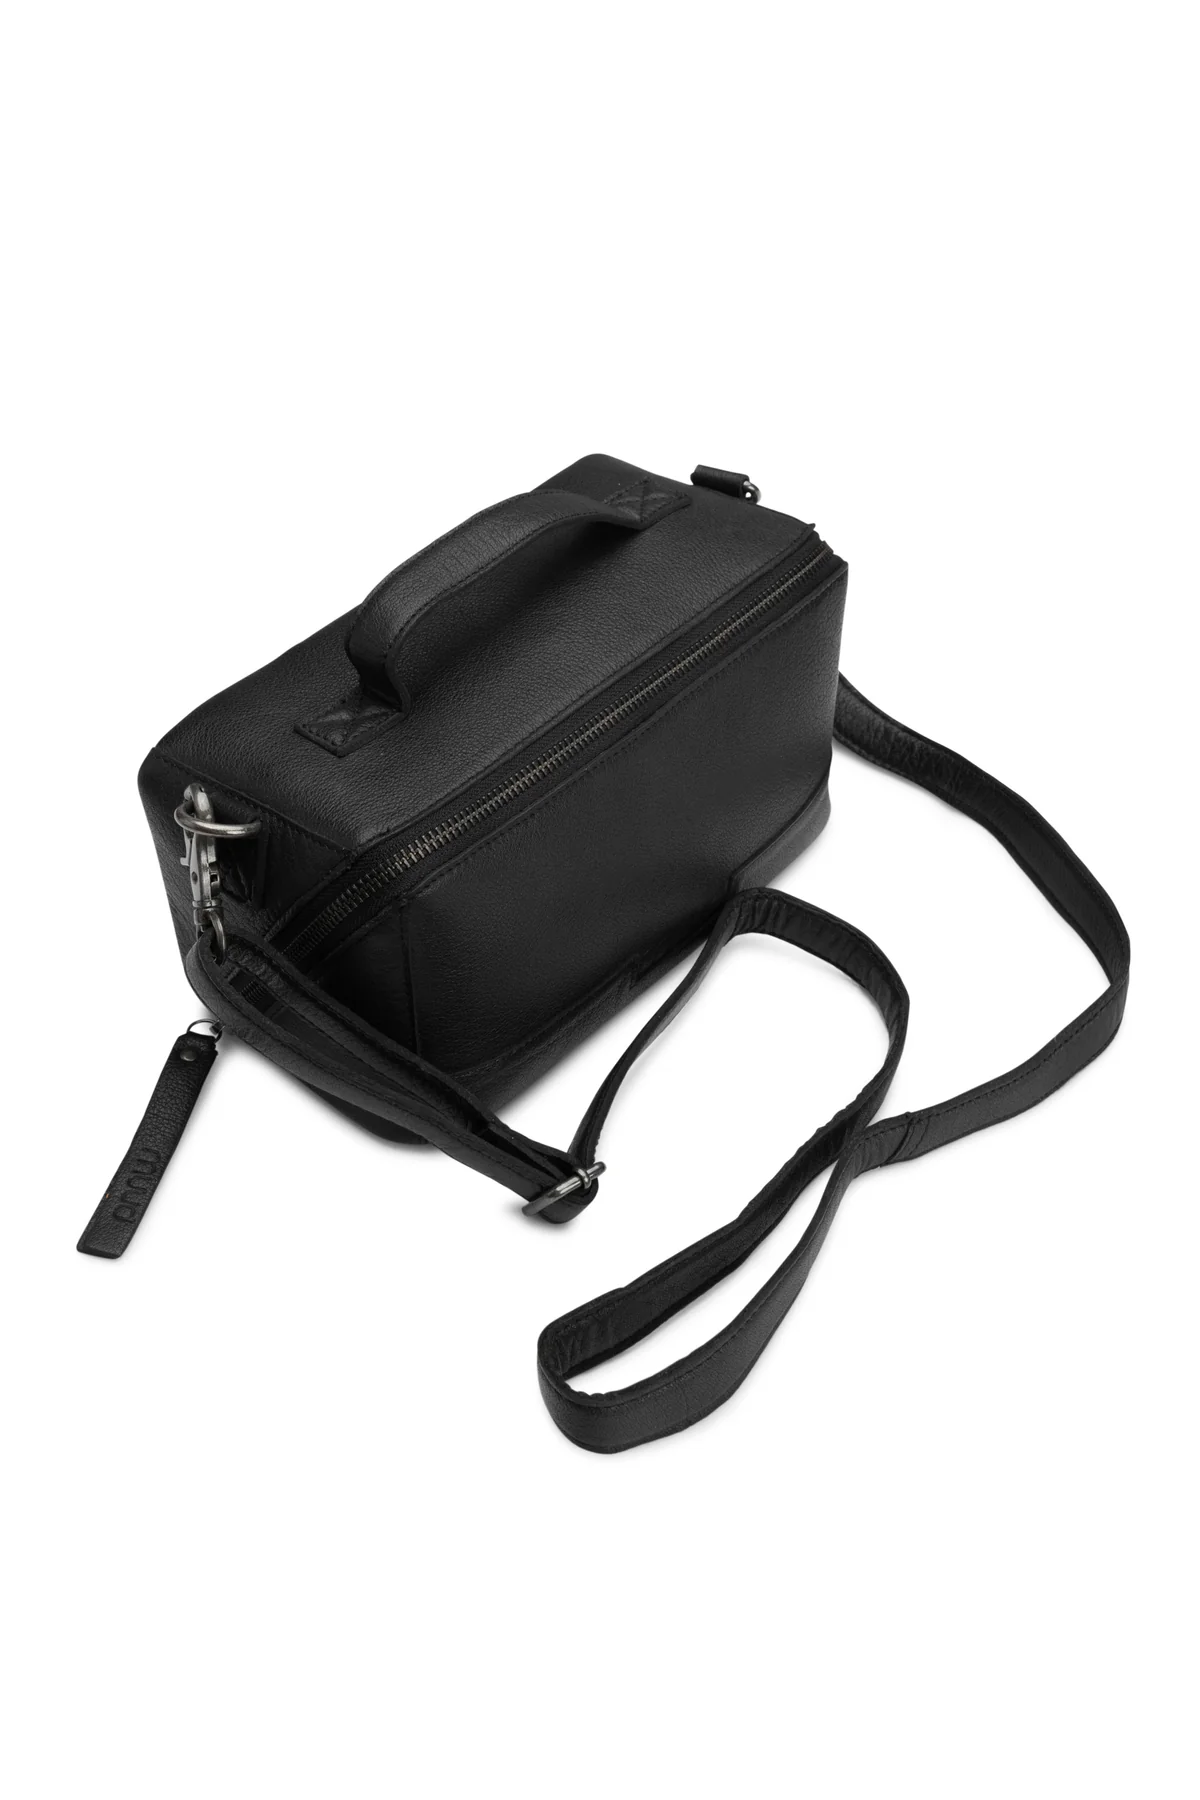 Muud_Cleo_black_closed_front_with_strap